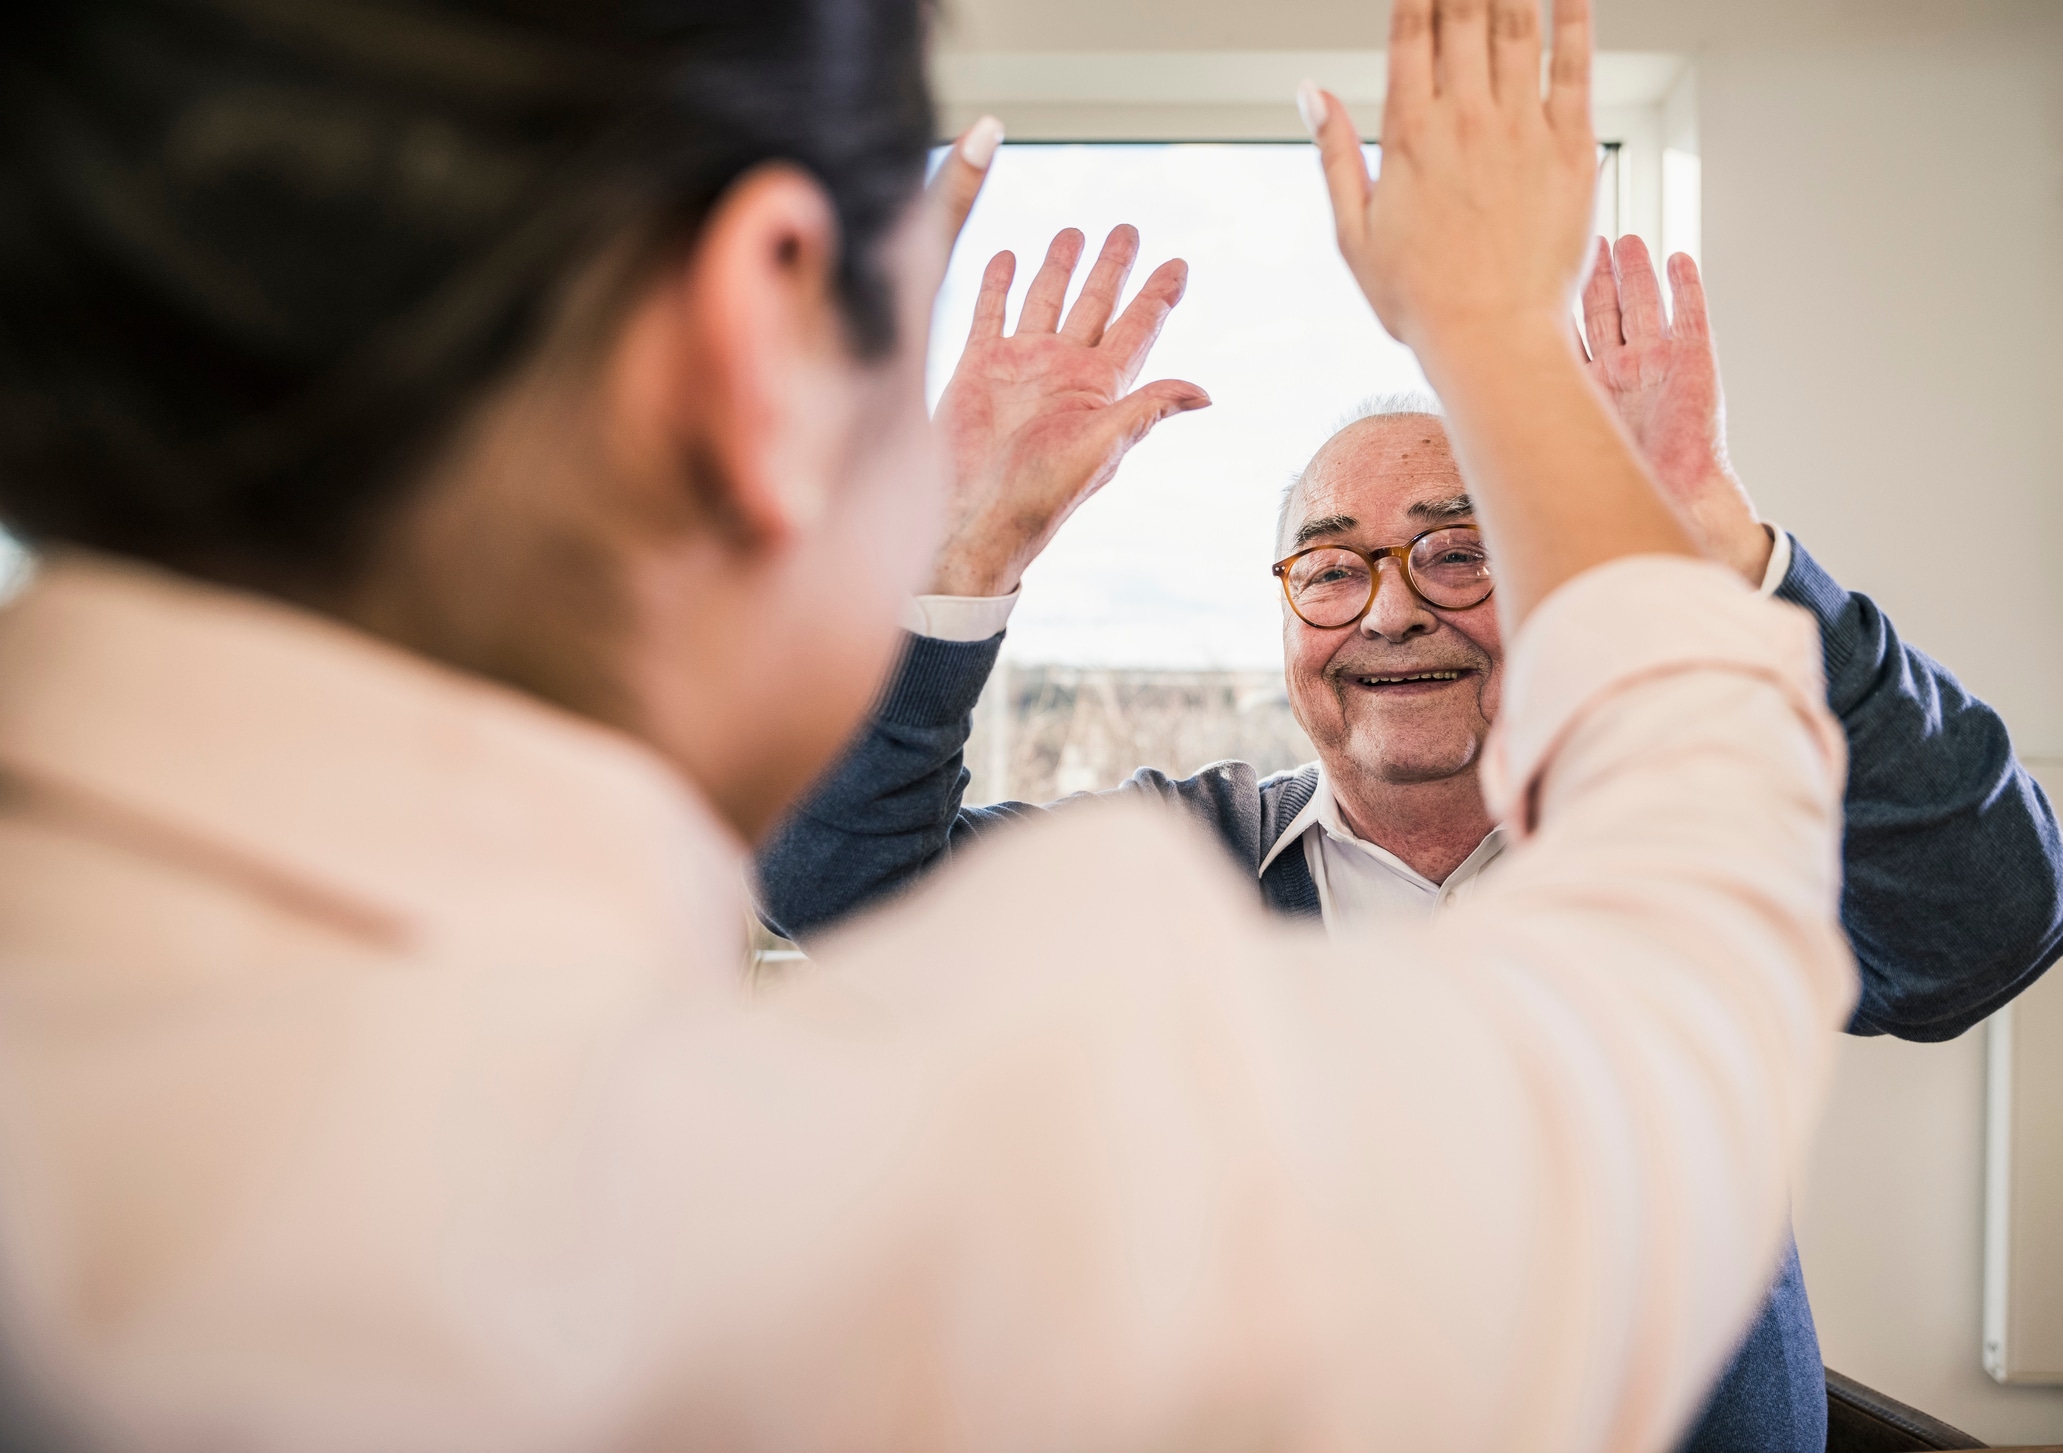 Is a job caring for the elderly right for you?